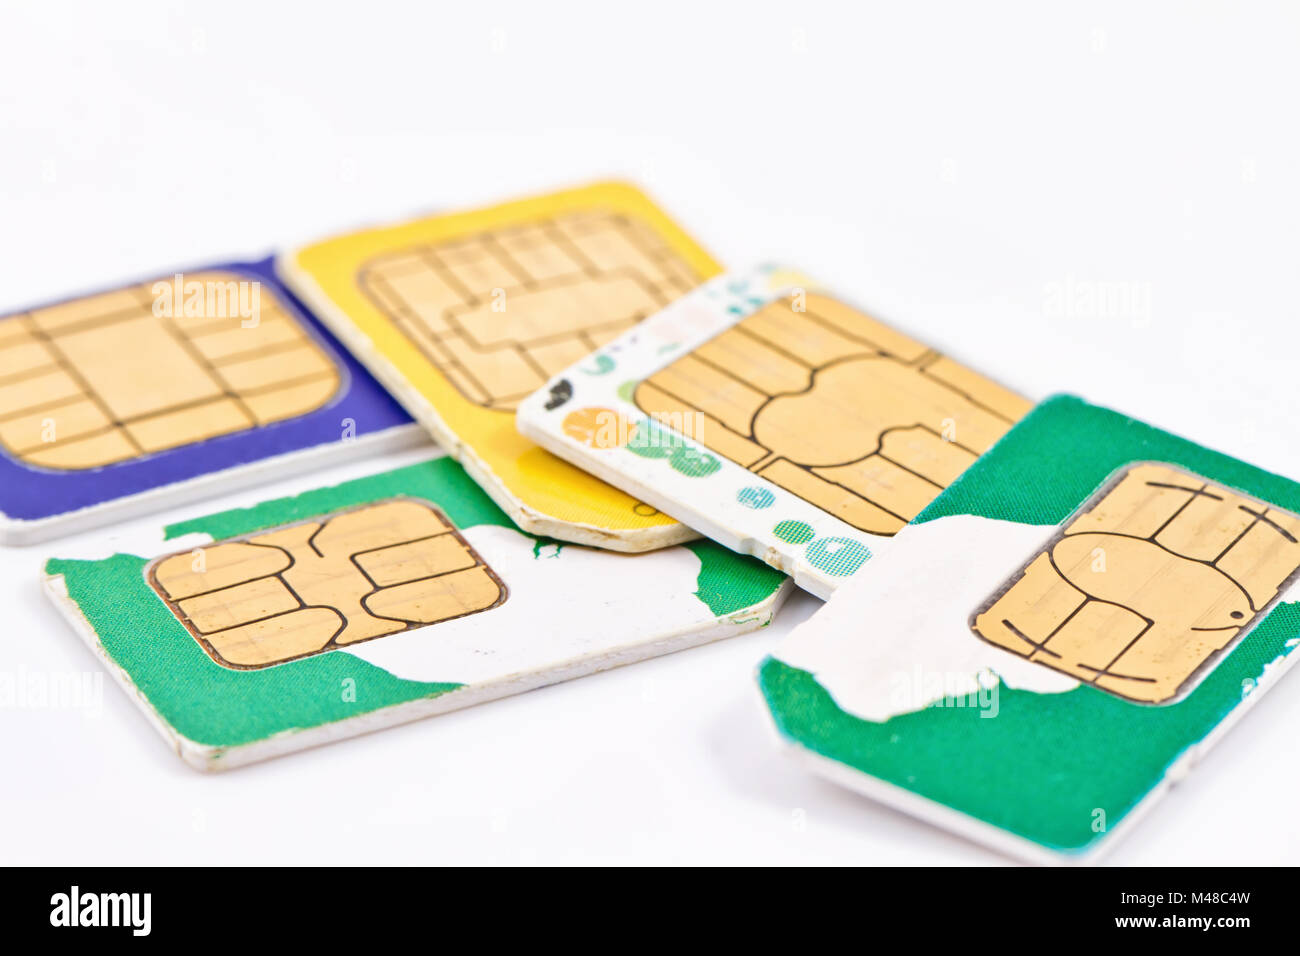 simcards of different mobile service providers and russian money Stock Photo